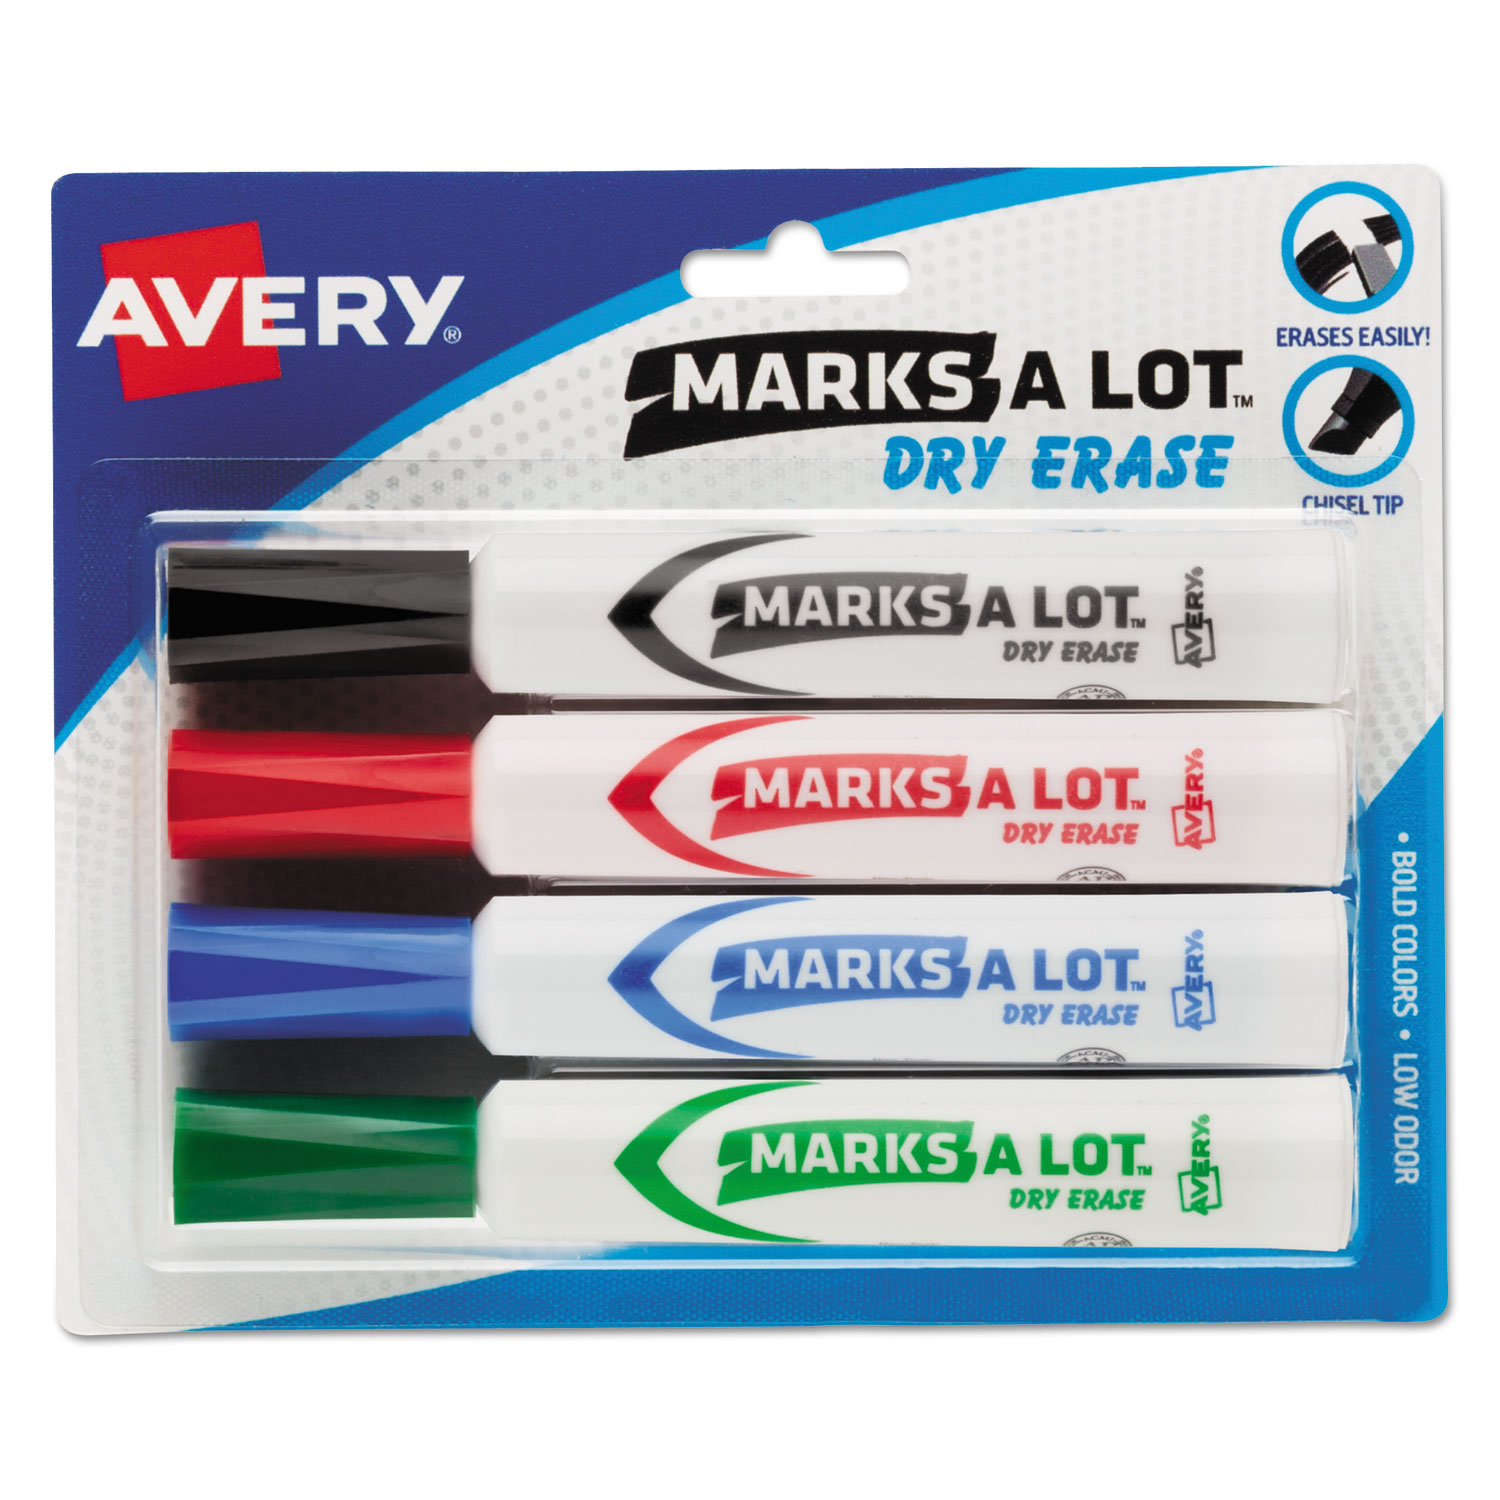  Avery 24409 MARKS A LOT Desk-Style Dry Erase Marker, Broad Chisel Tip, Assorted Colors, 4/Set (AVE24409) 